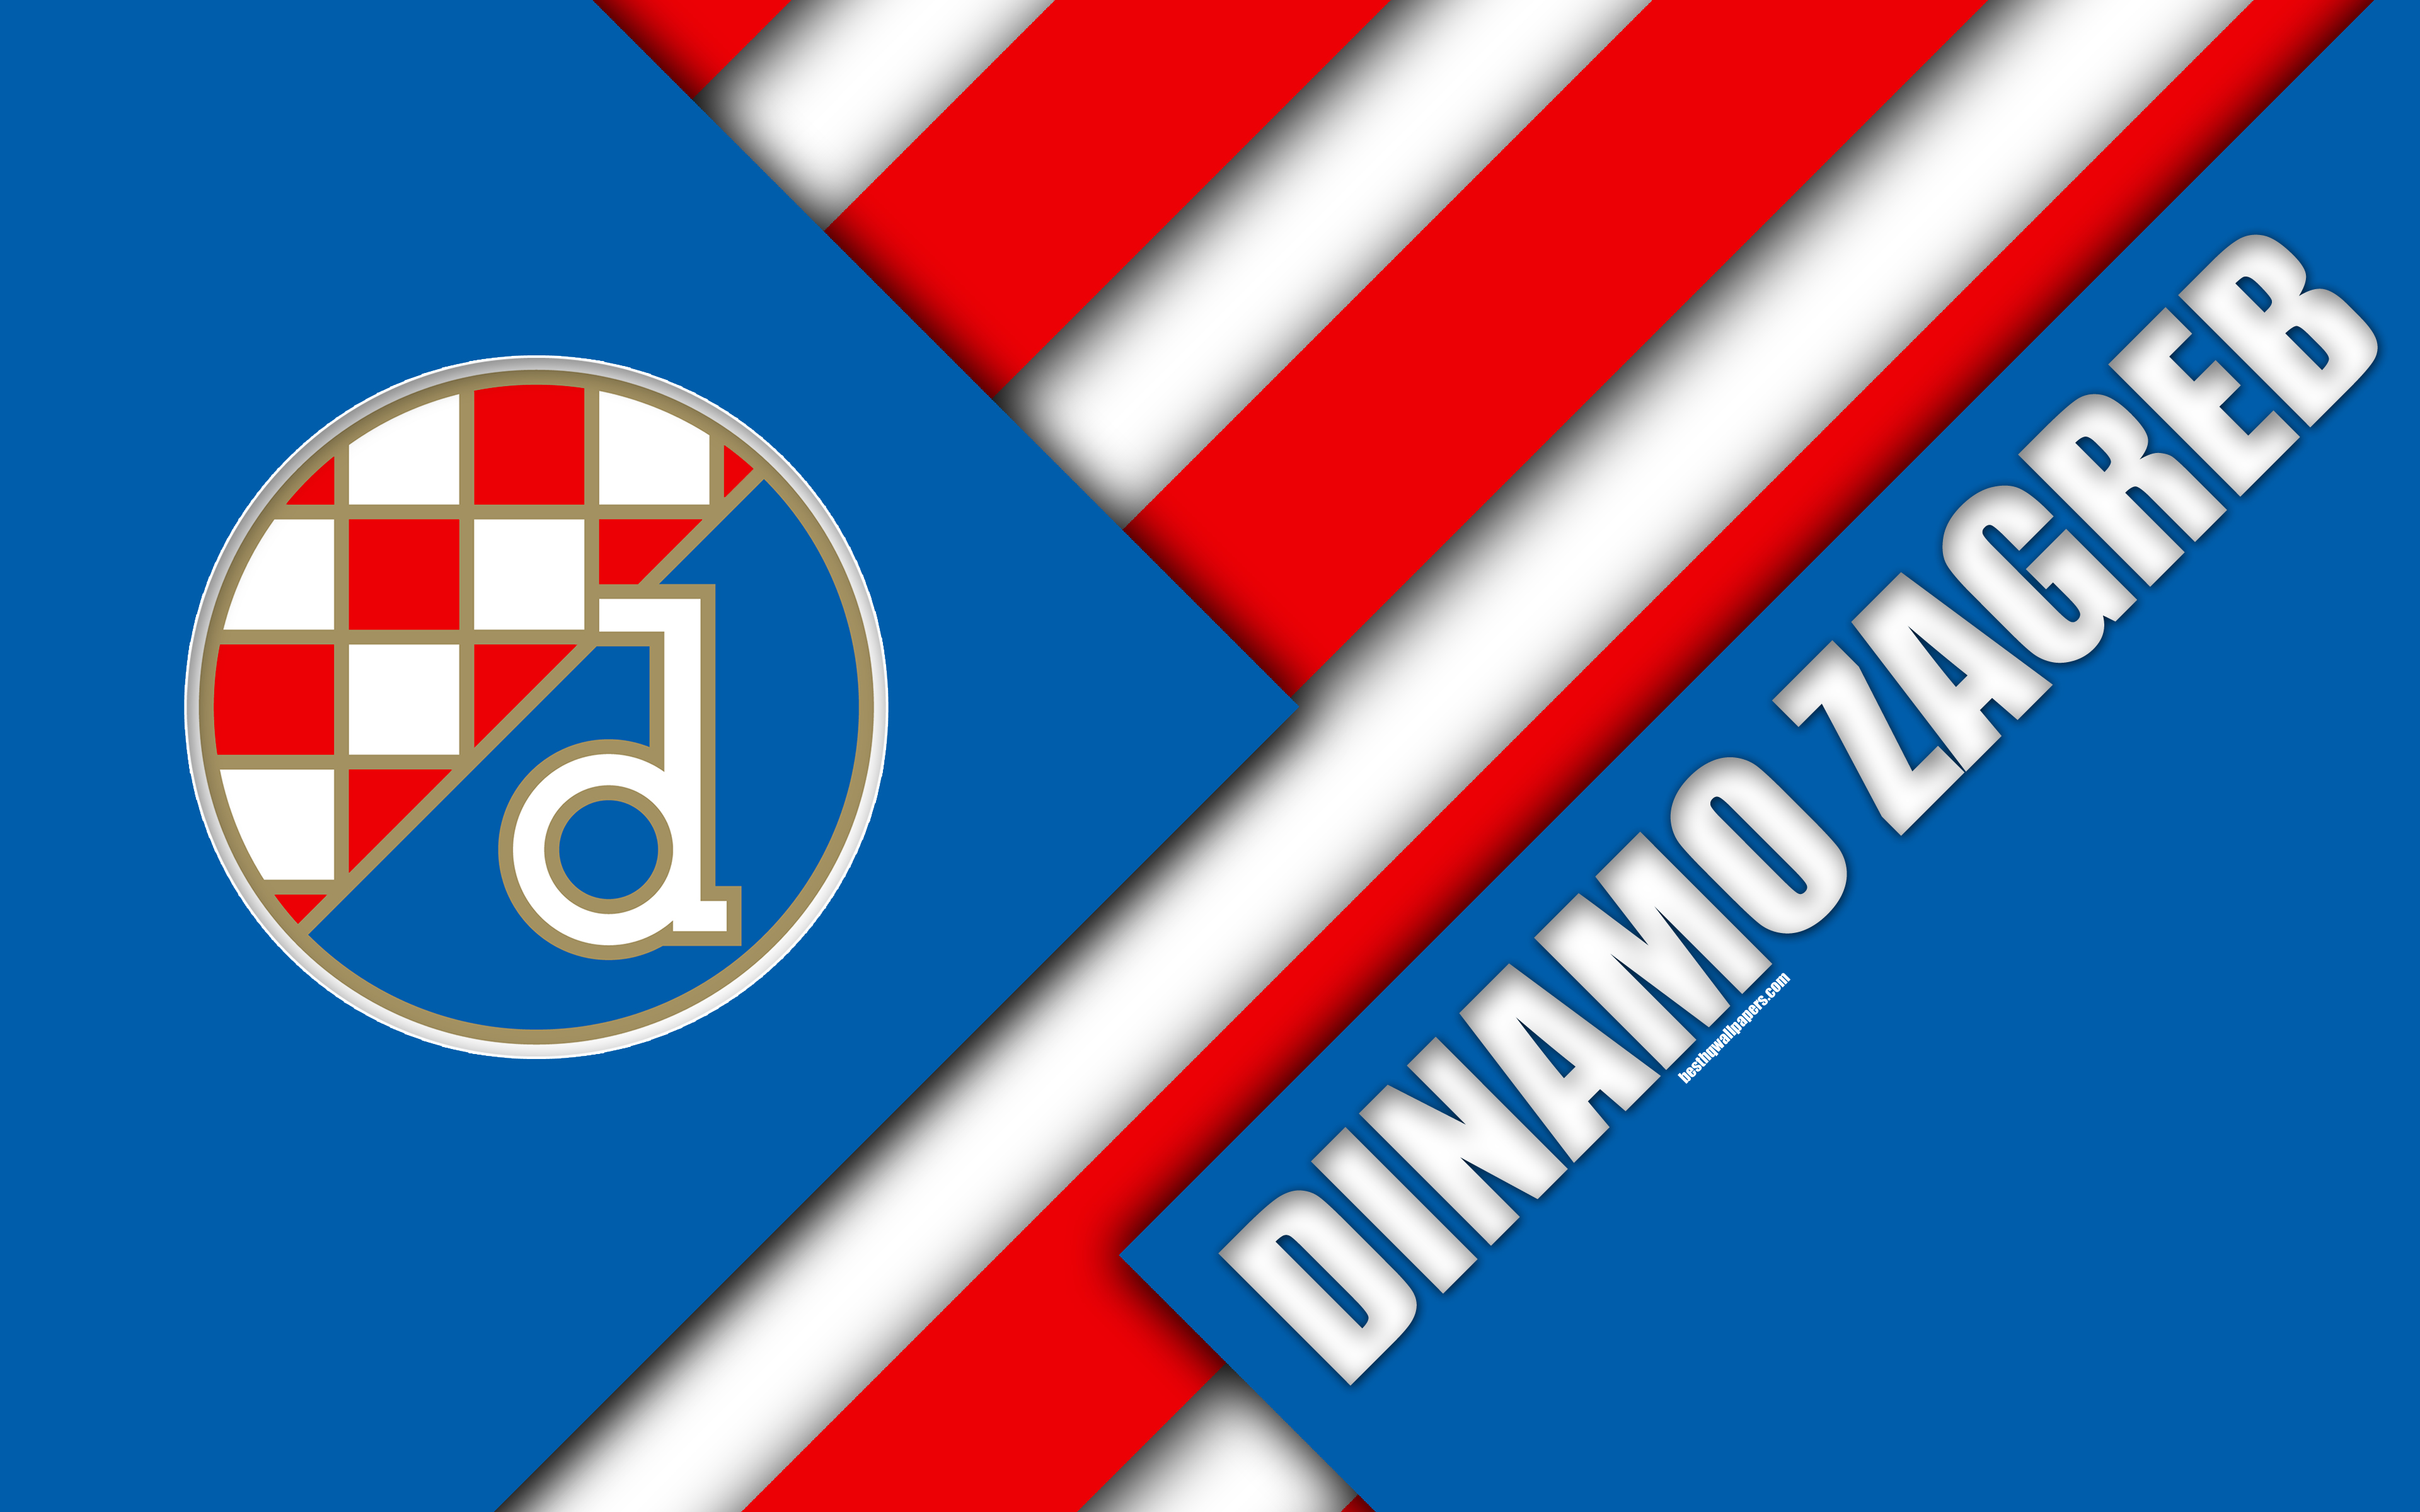 Download wallpaper GNK Dinamo Zagreb, 4k, blue white abstraction